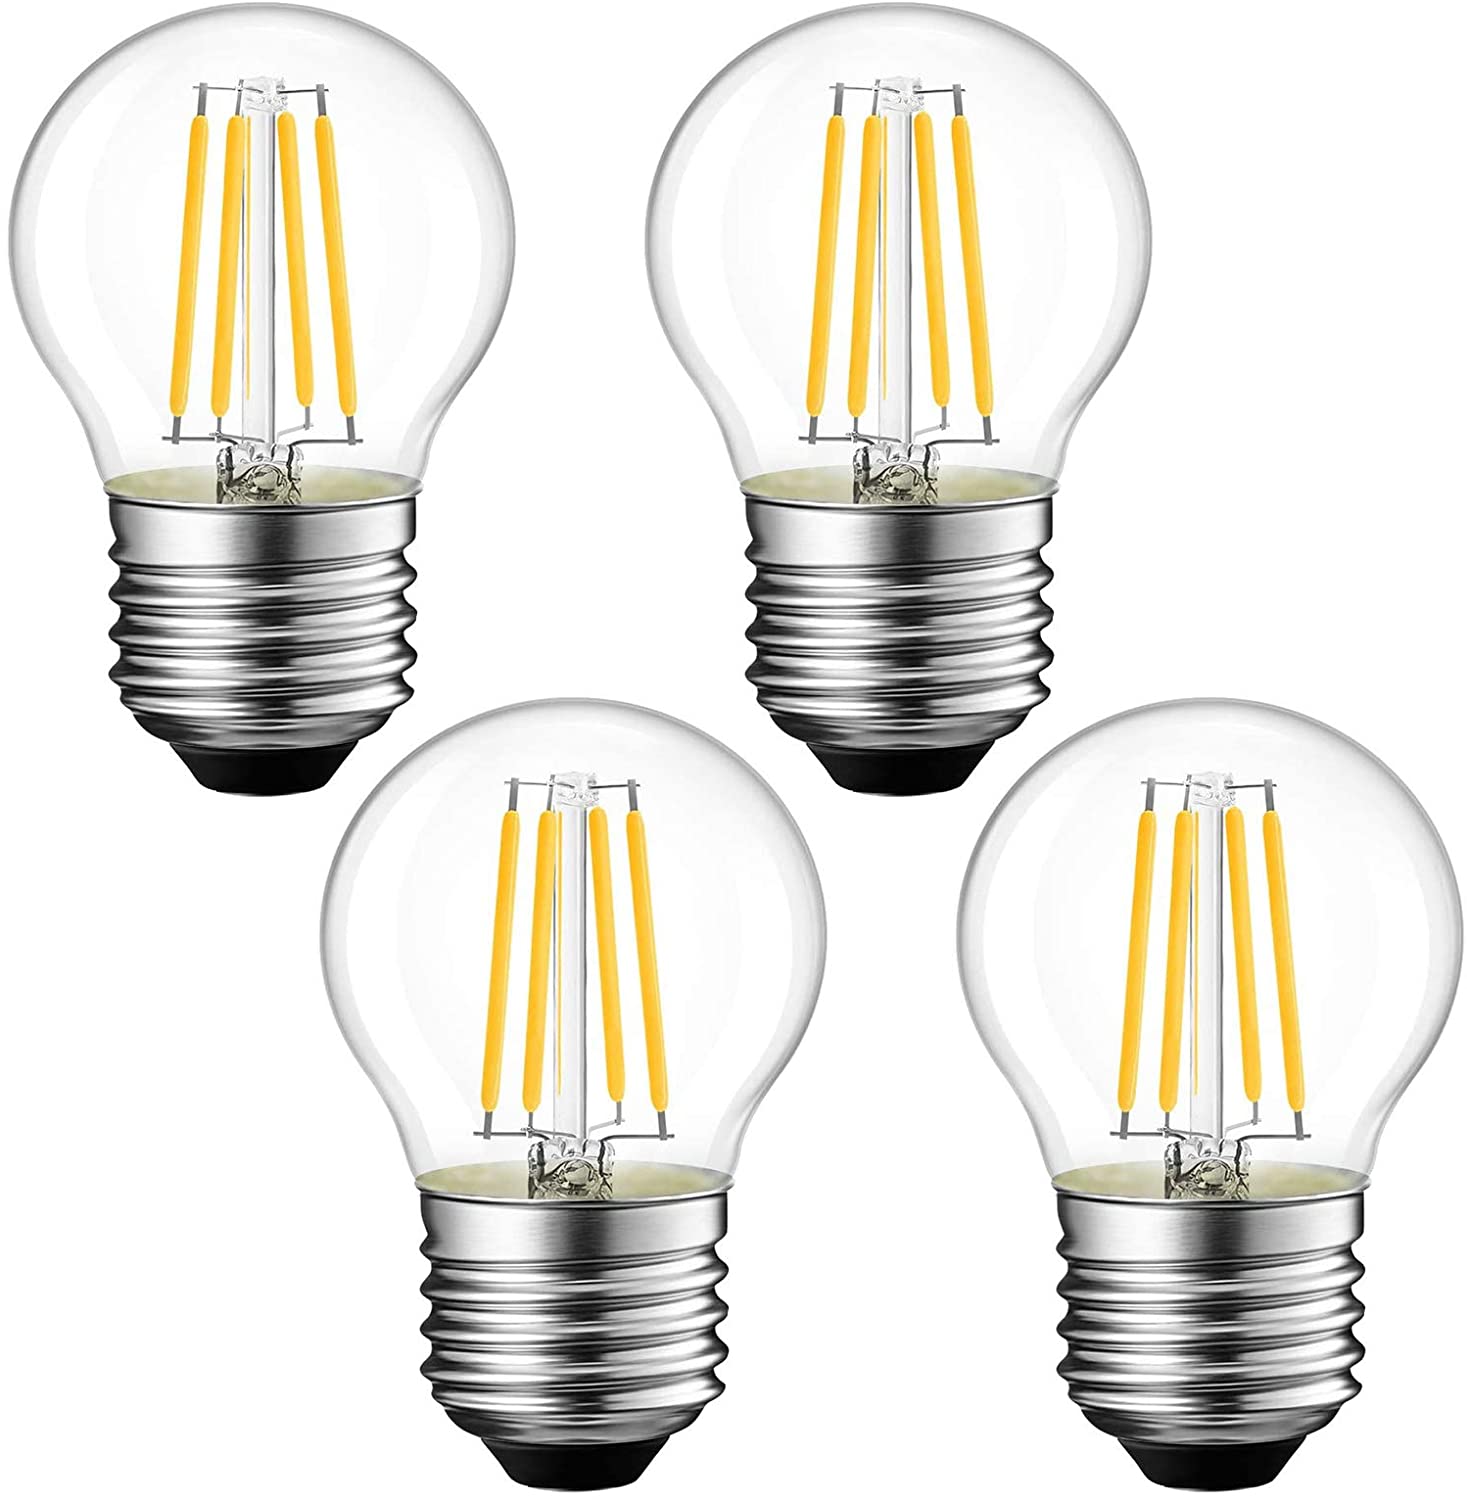 Best quality Par38 Led Bulbs - G45 LED Industrial Vintage Edison Style LED Filament Light Bulb Dimmable Soft Warm – Firstech